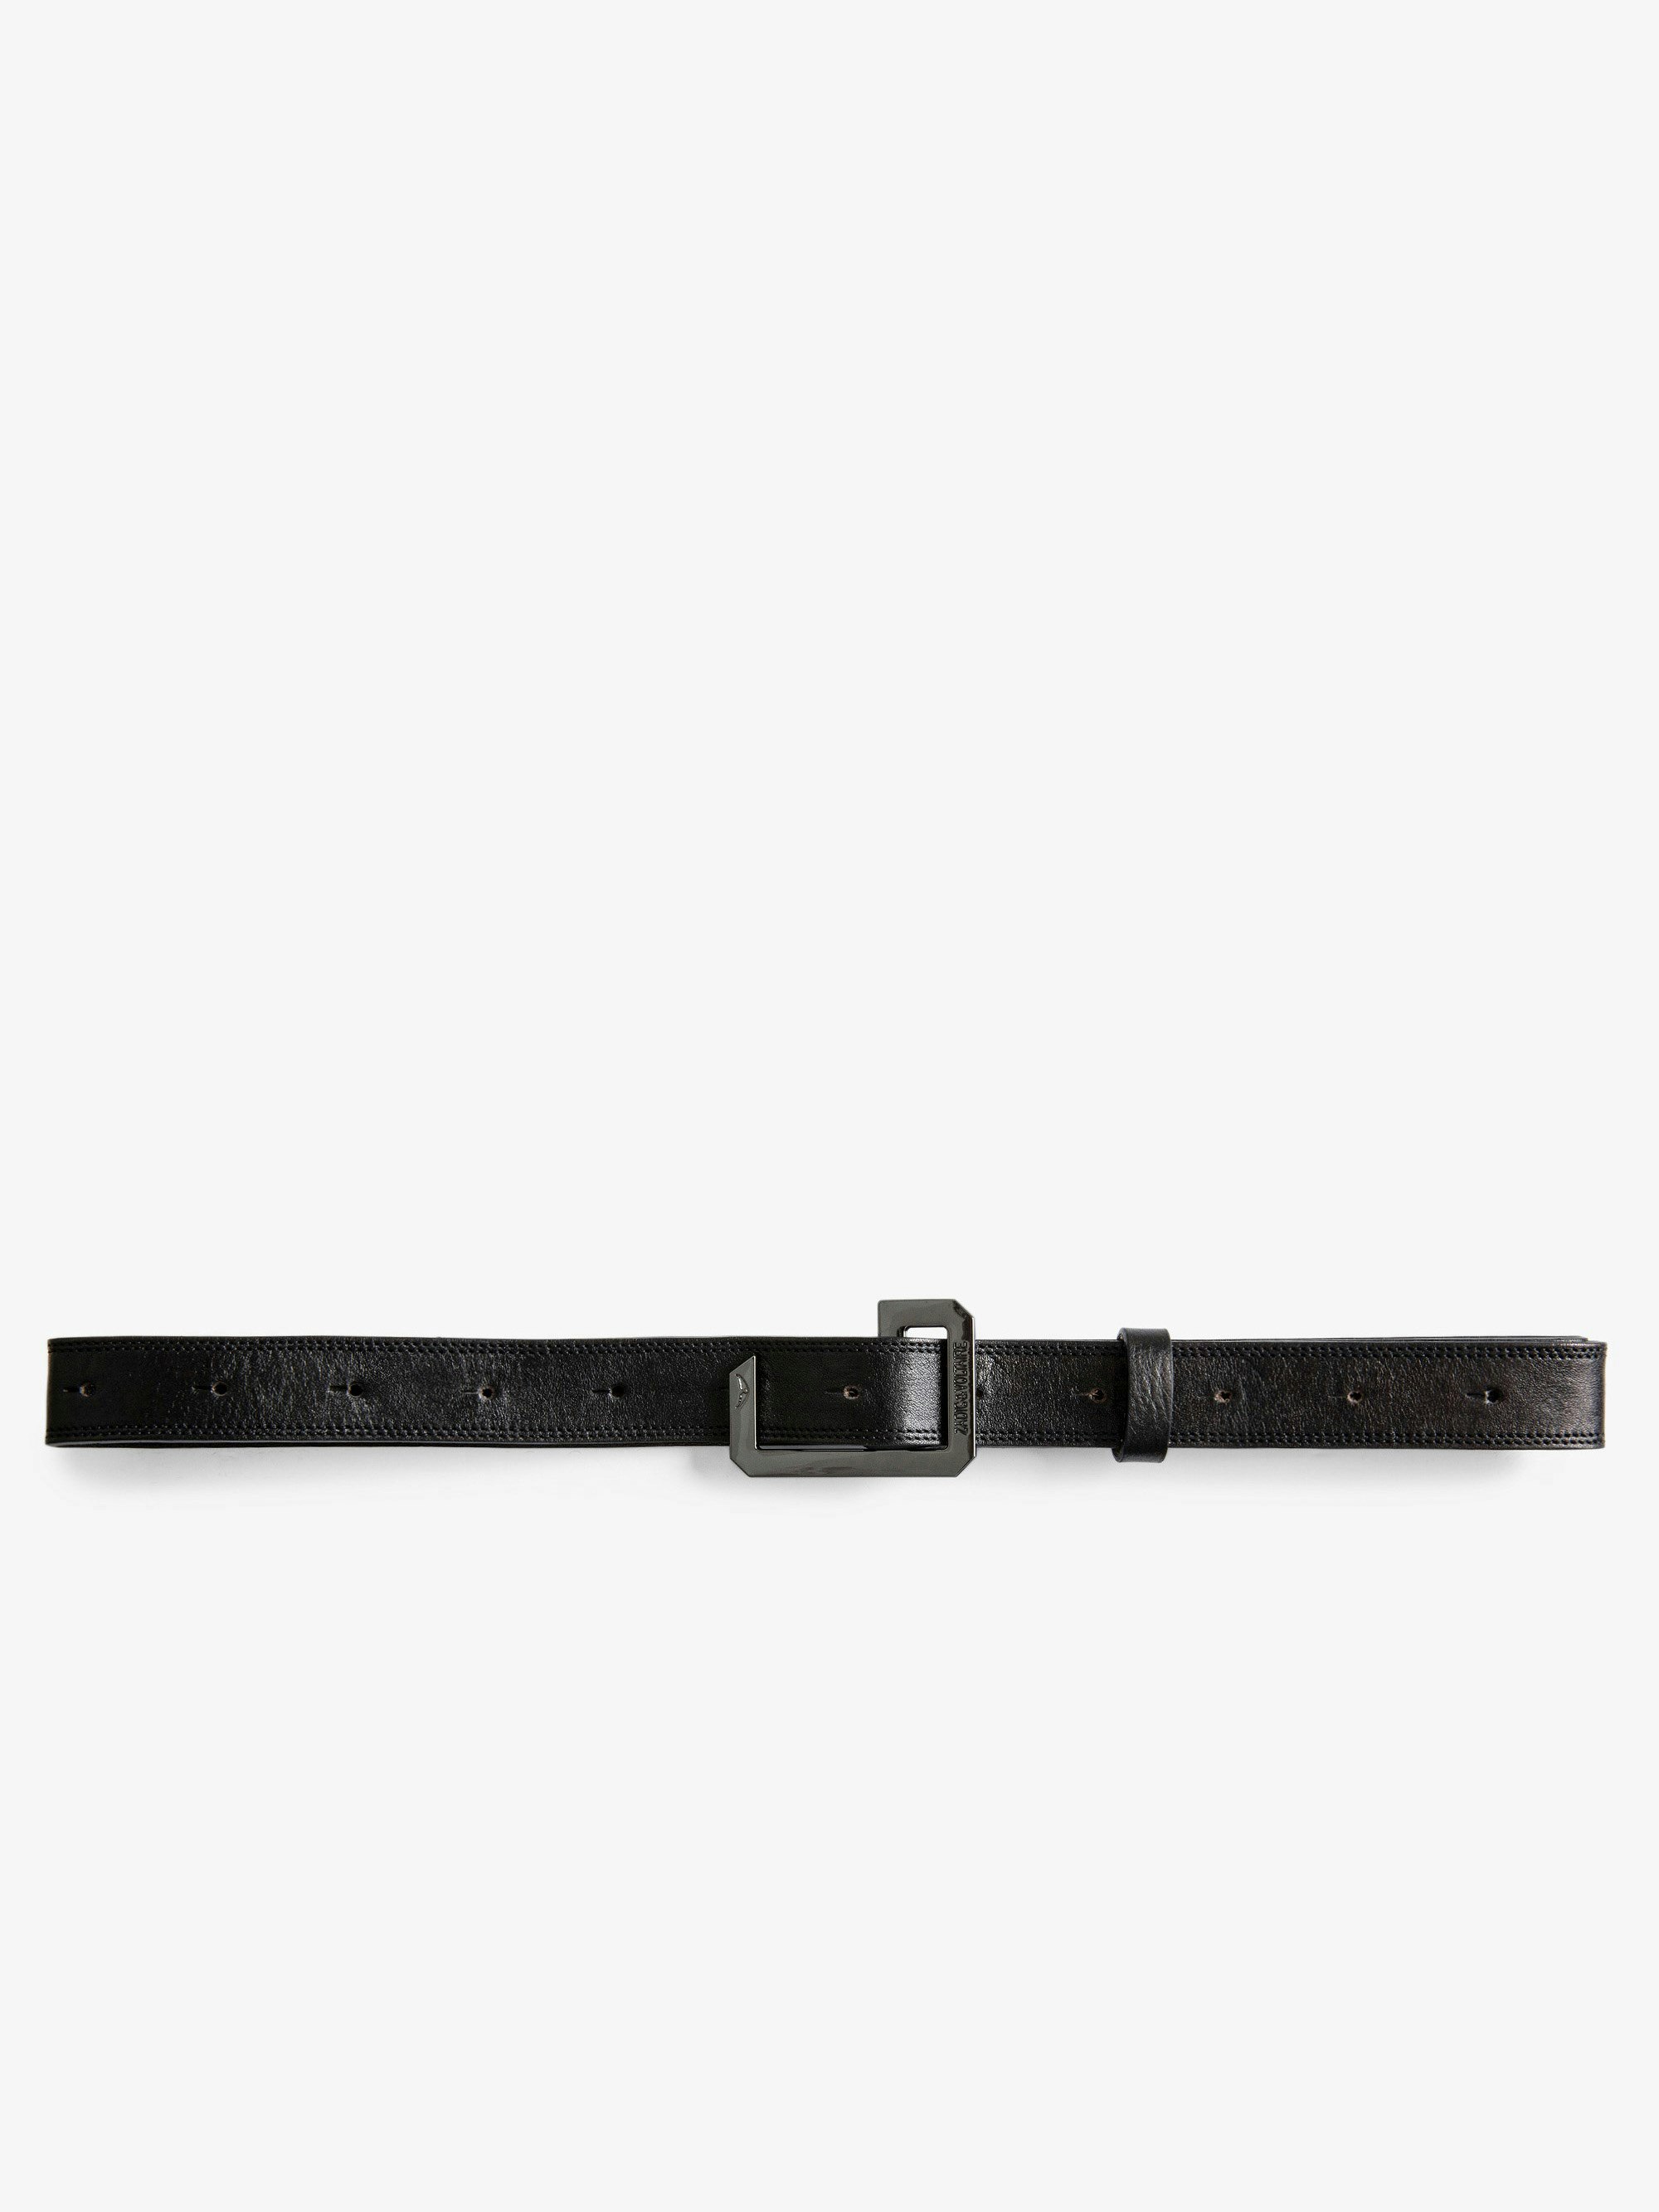 La Cecilia Belt - Women's black leather belt with black C-shaped buckle. Buying this product, you support a responsible leather production through Leather Working Group.